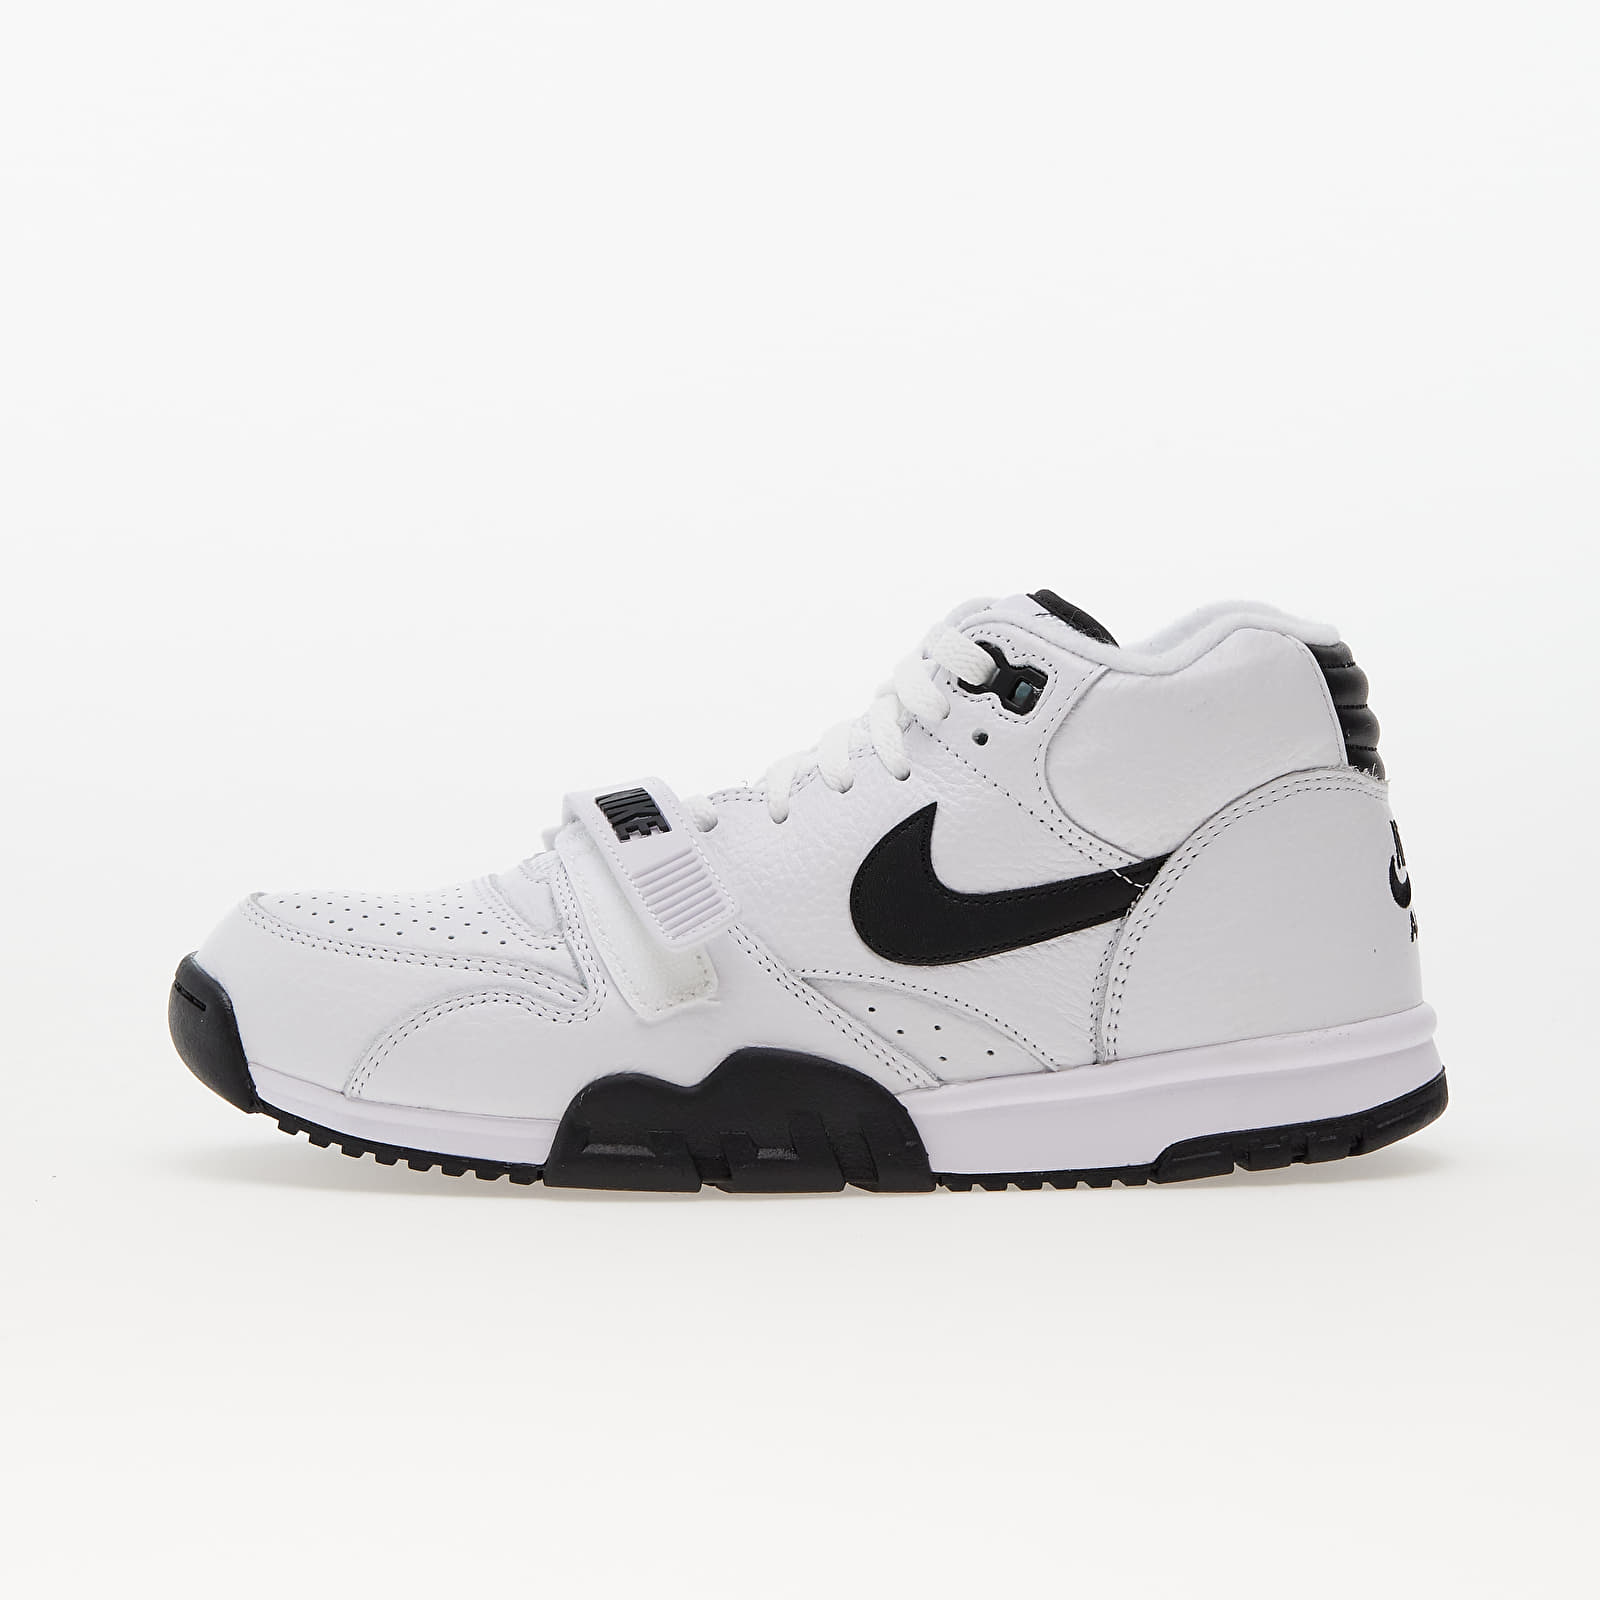 Chaussures et baskets homme Nike Air Trainer 1 White/ Black-White